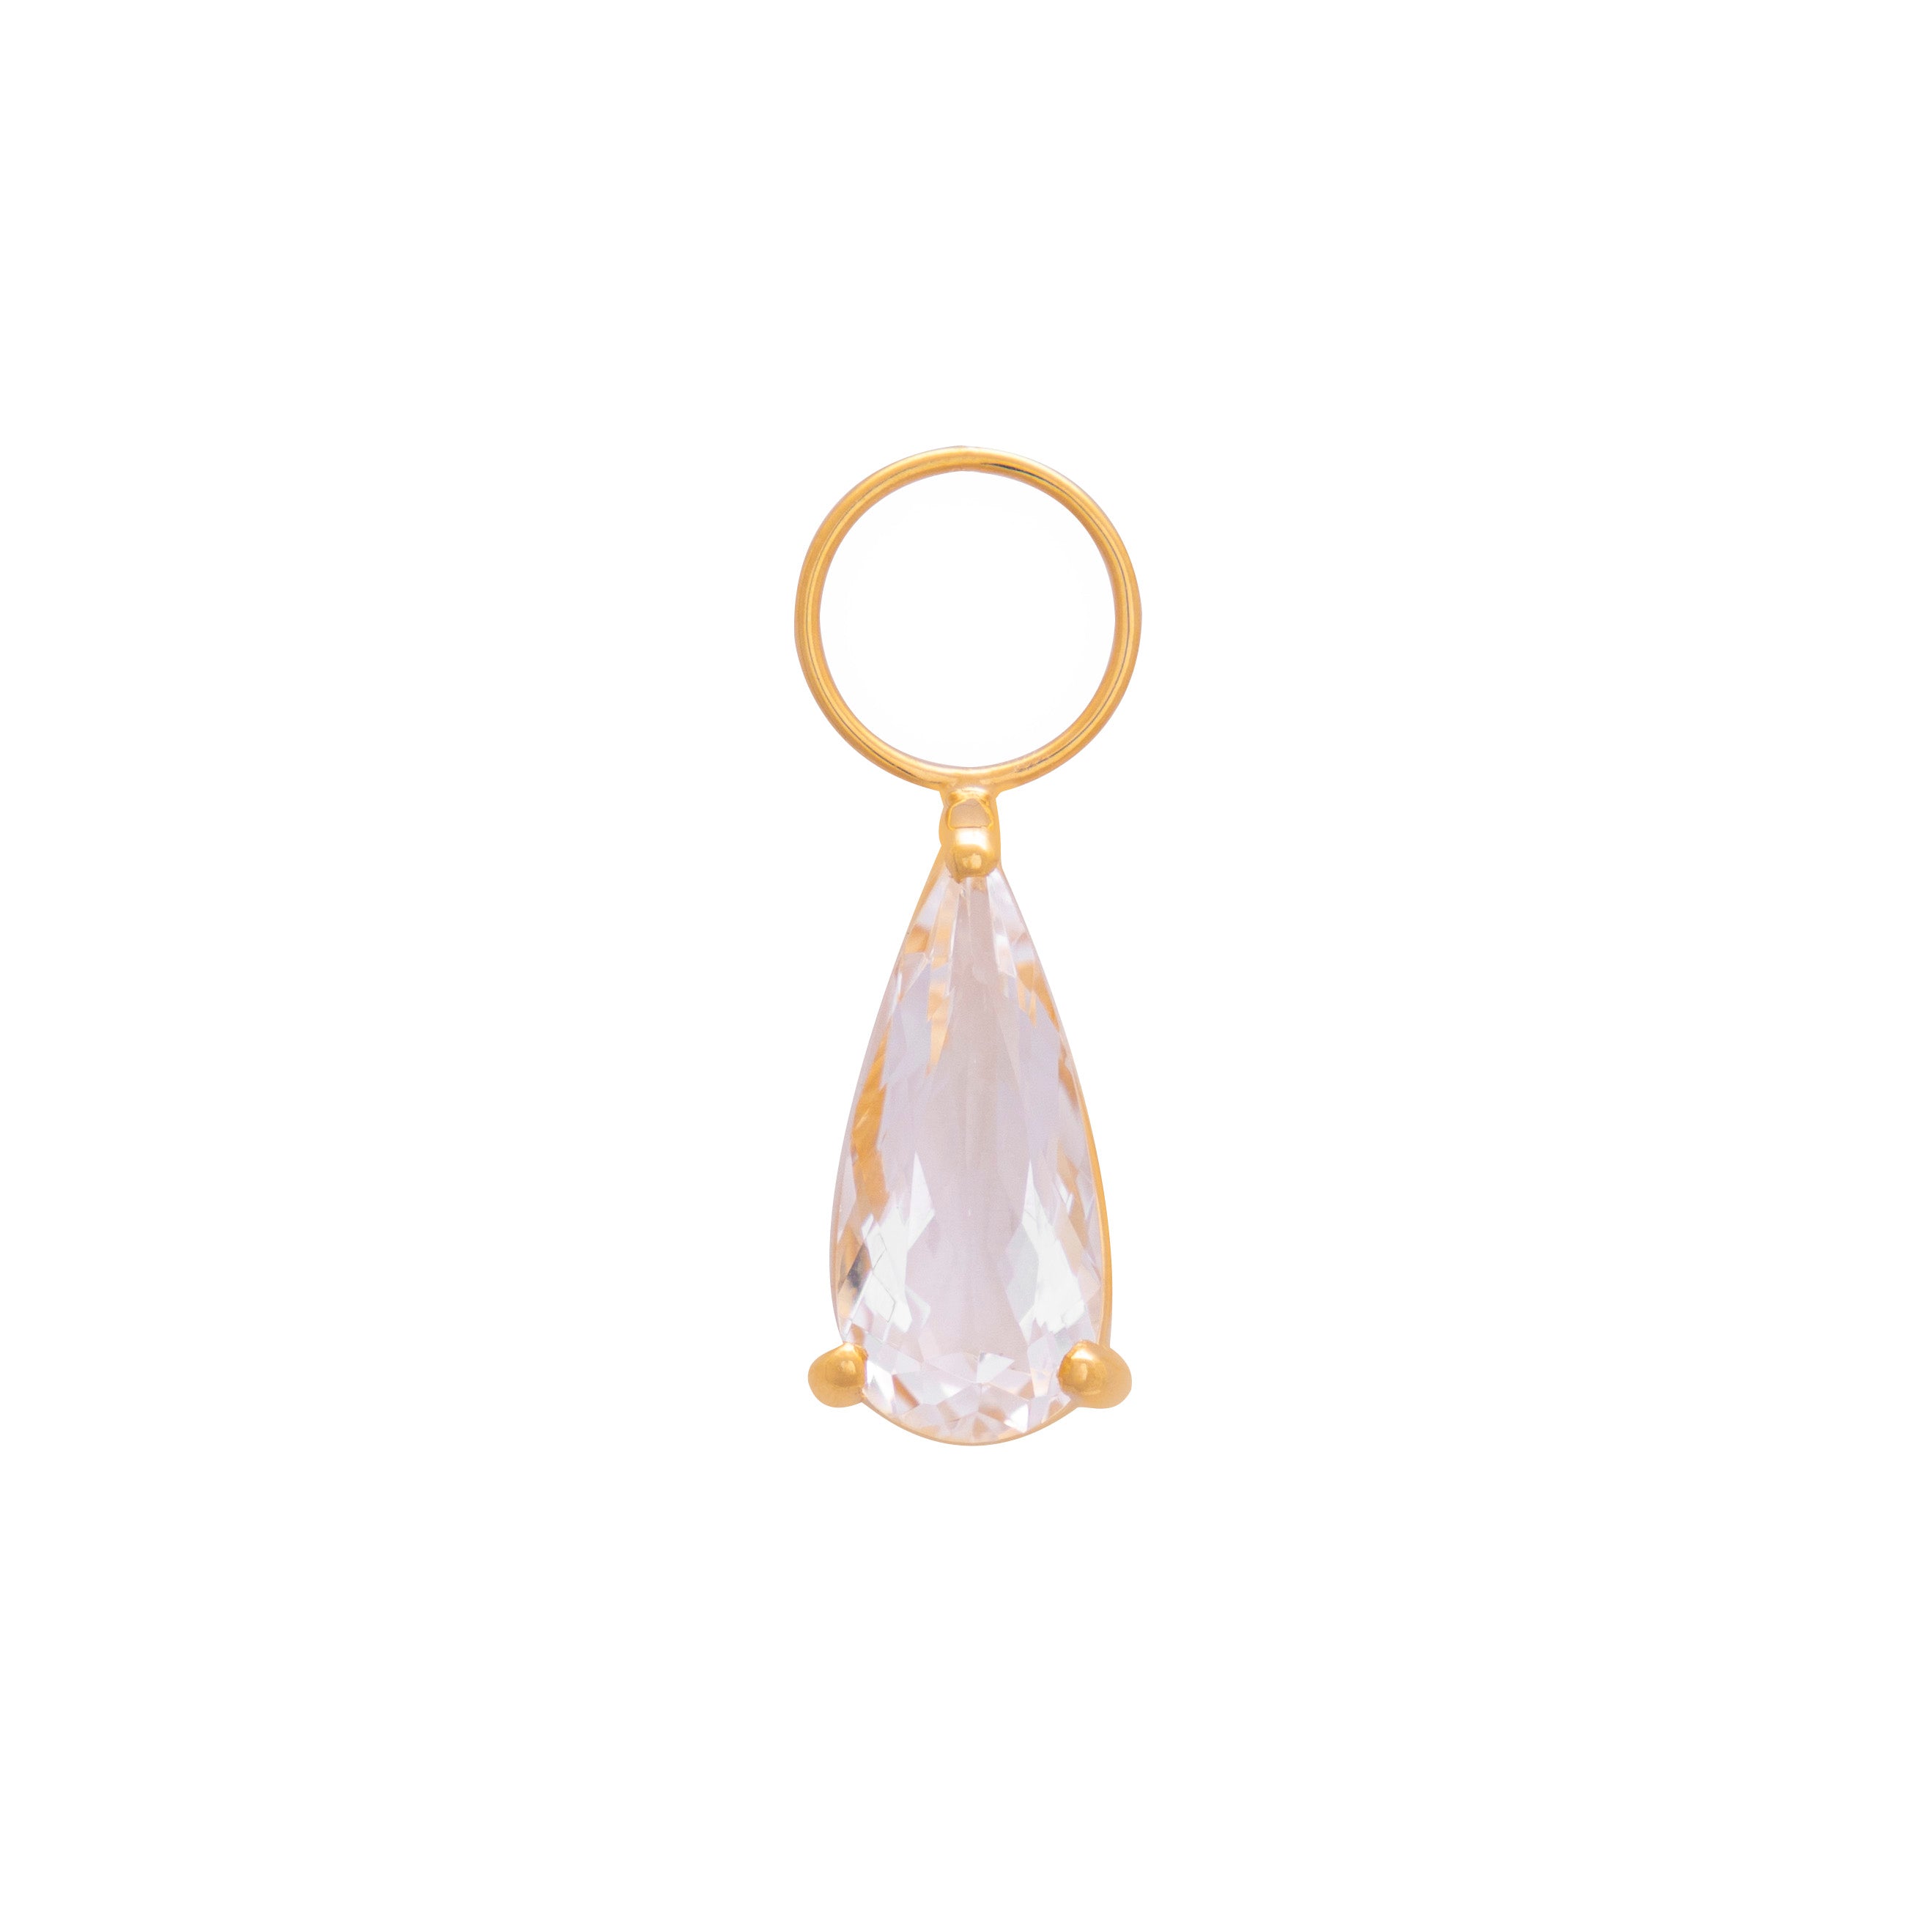 SMALL ROCK DROP PENDANT IN 18K YELLOW GOLD PLATED SILVER WITH QUARTZ